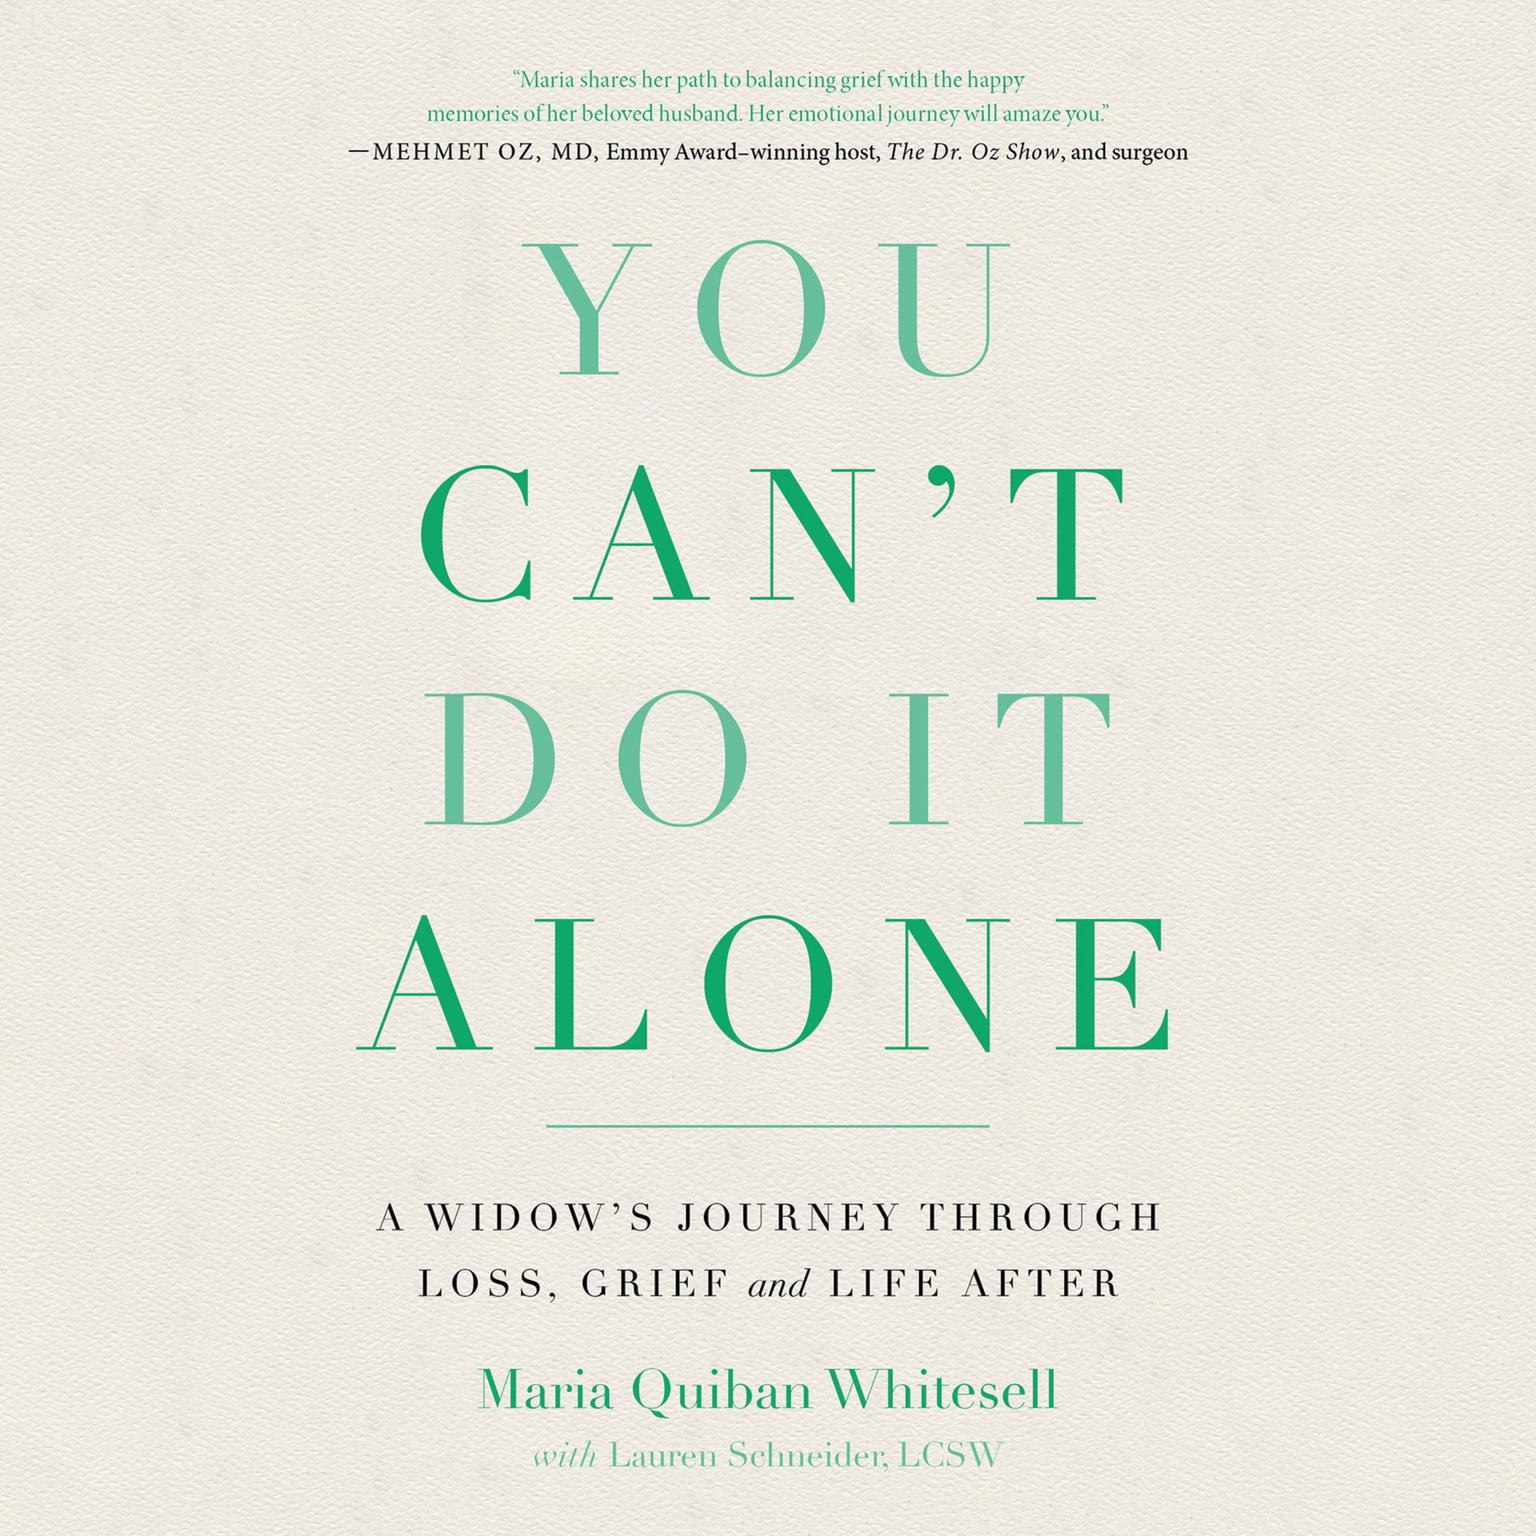 You Cant Do It Alone: A Widows Journey Through Loss, Grief and Life After Audiobook, by Maria Quiban Whitesell